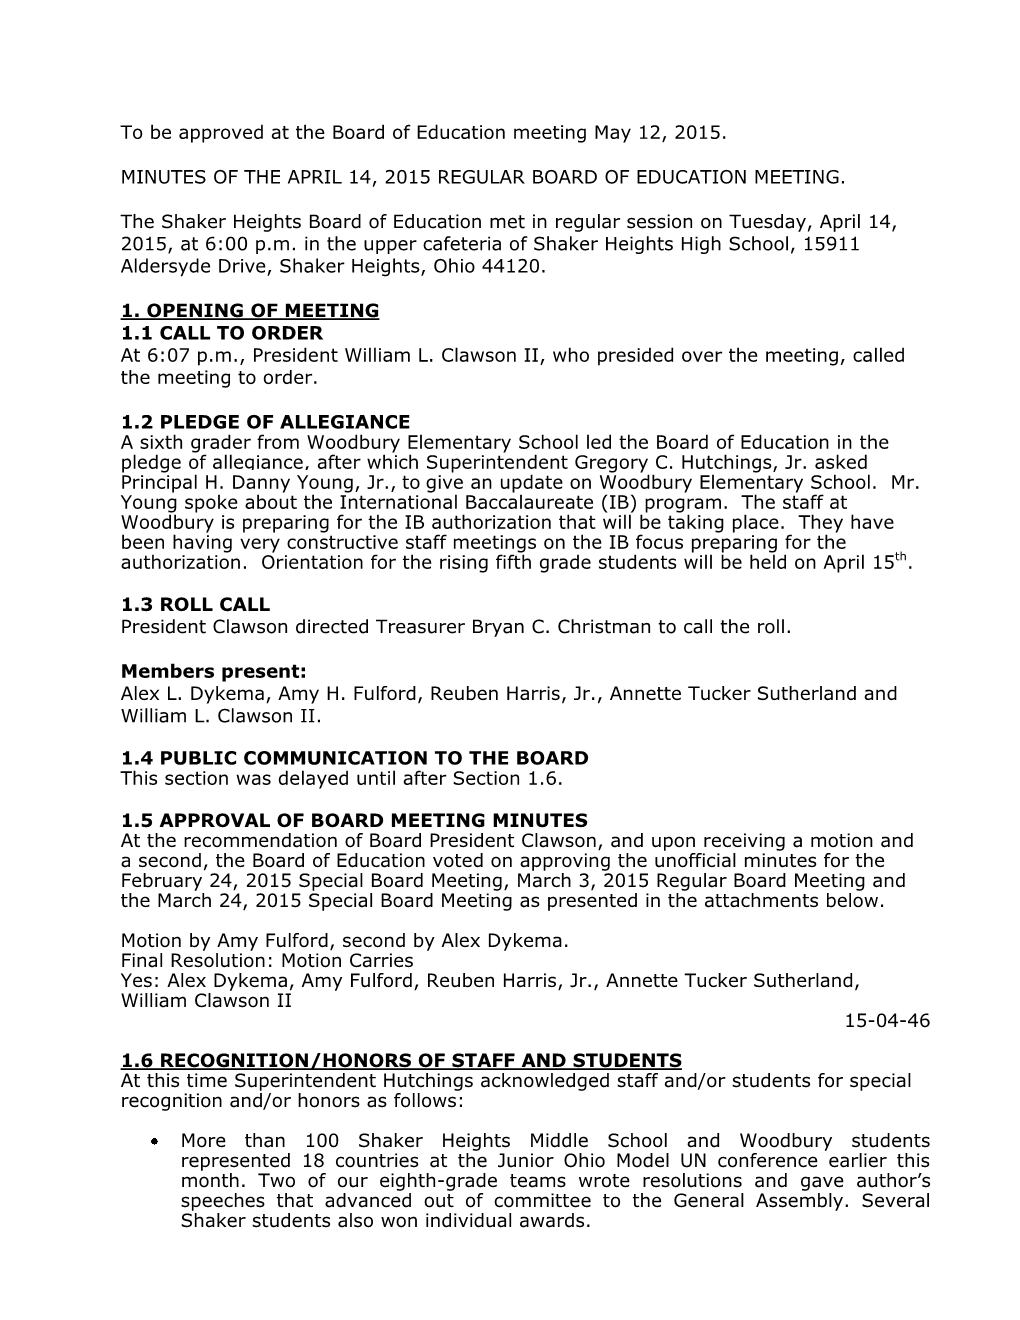 To Be Approved at the Board of Education Meeting May 12, 2015